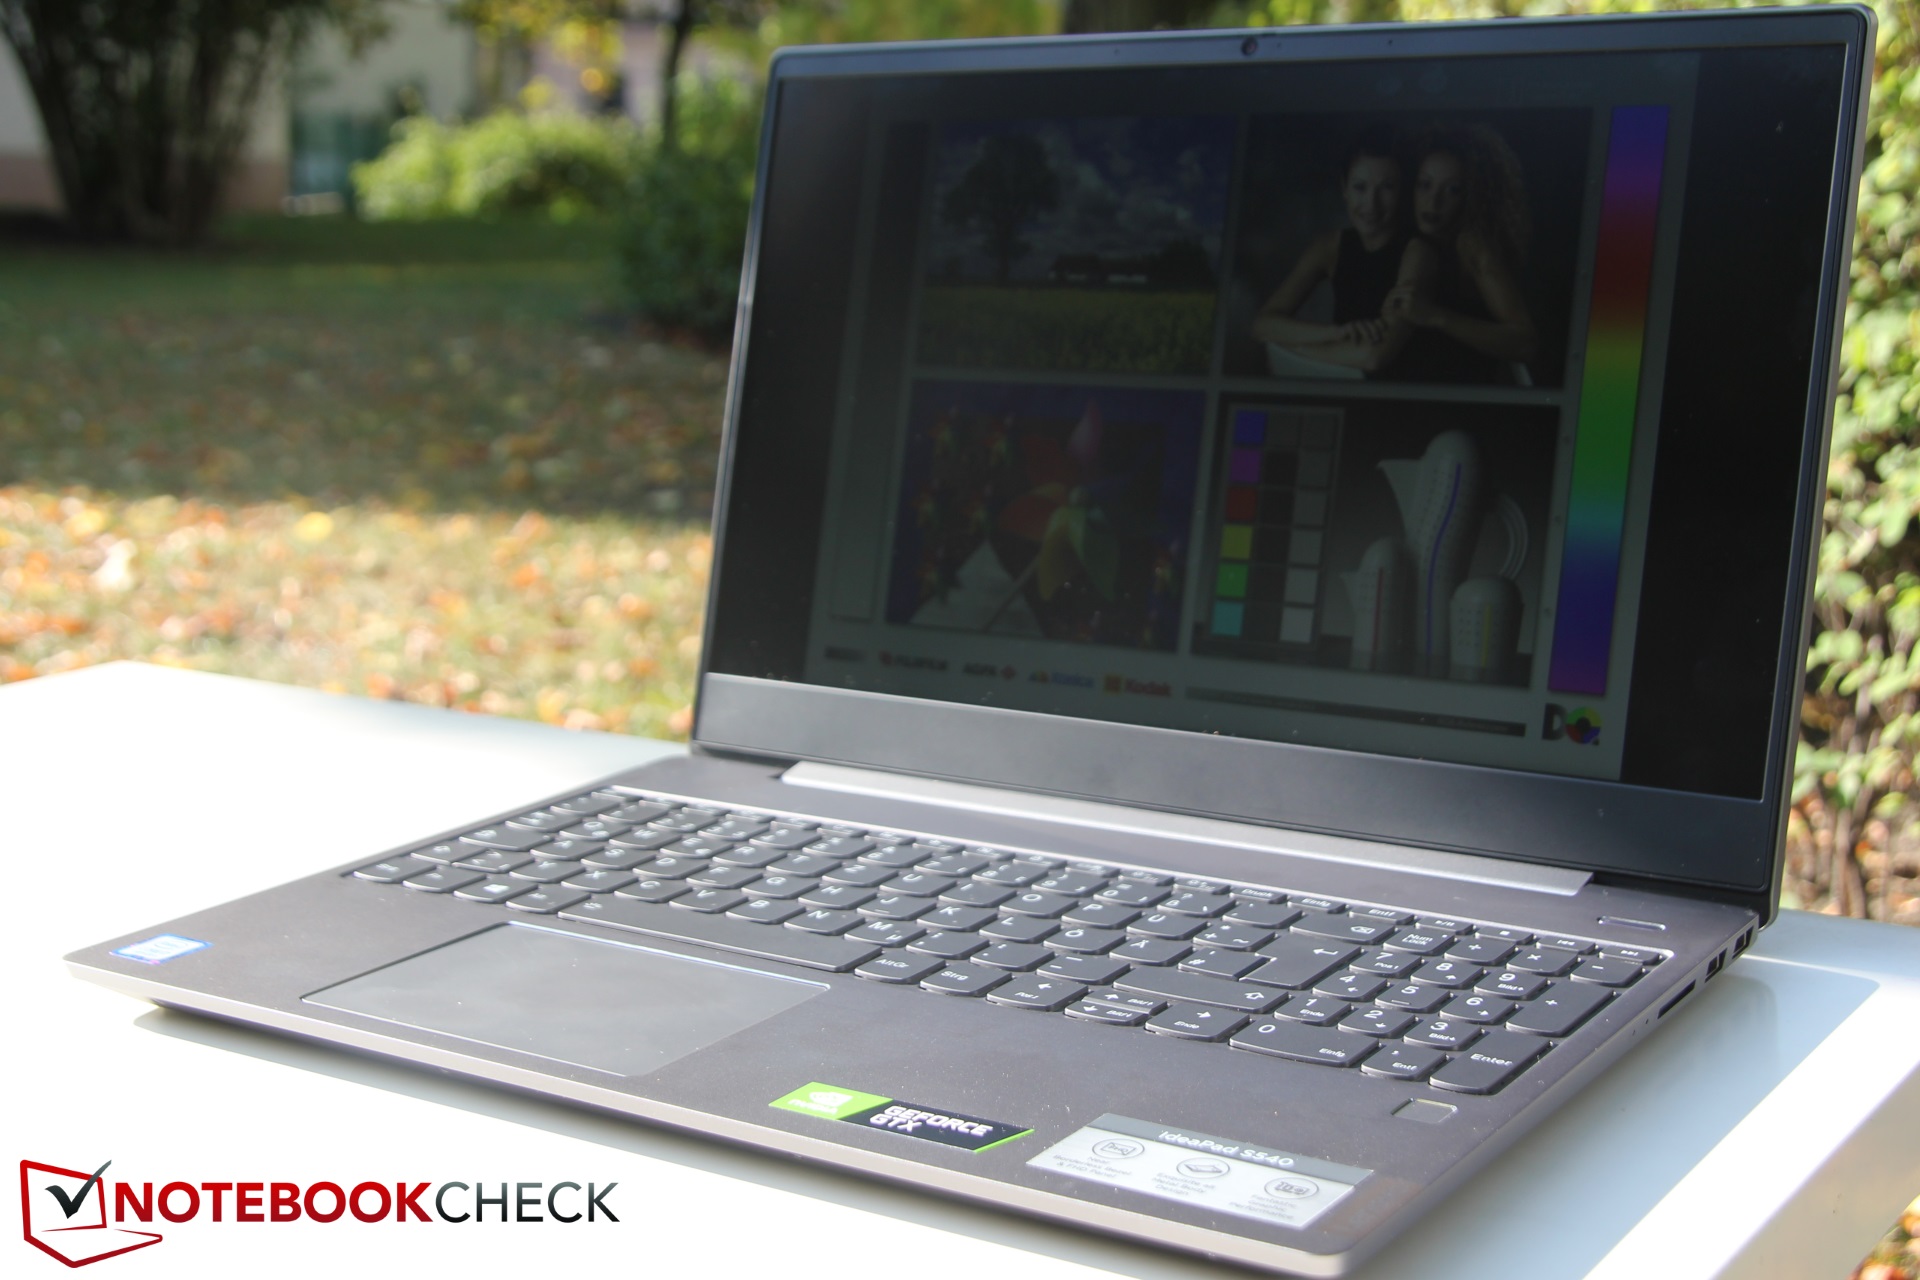 Currently testing: Lenovo IdeaPad S540 15-inch - A great all 